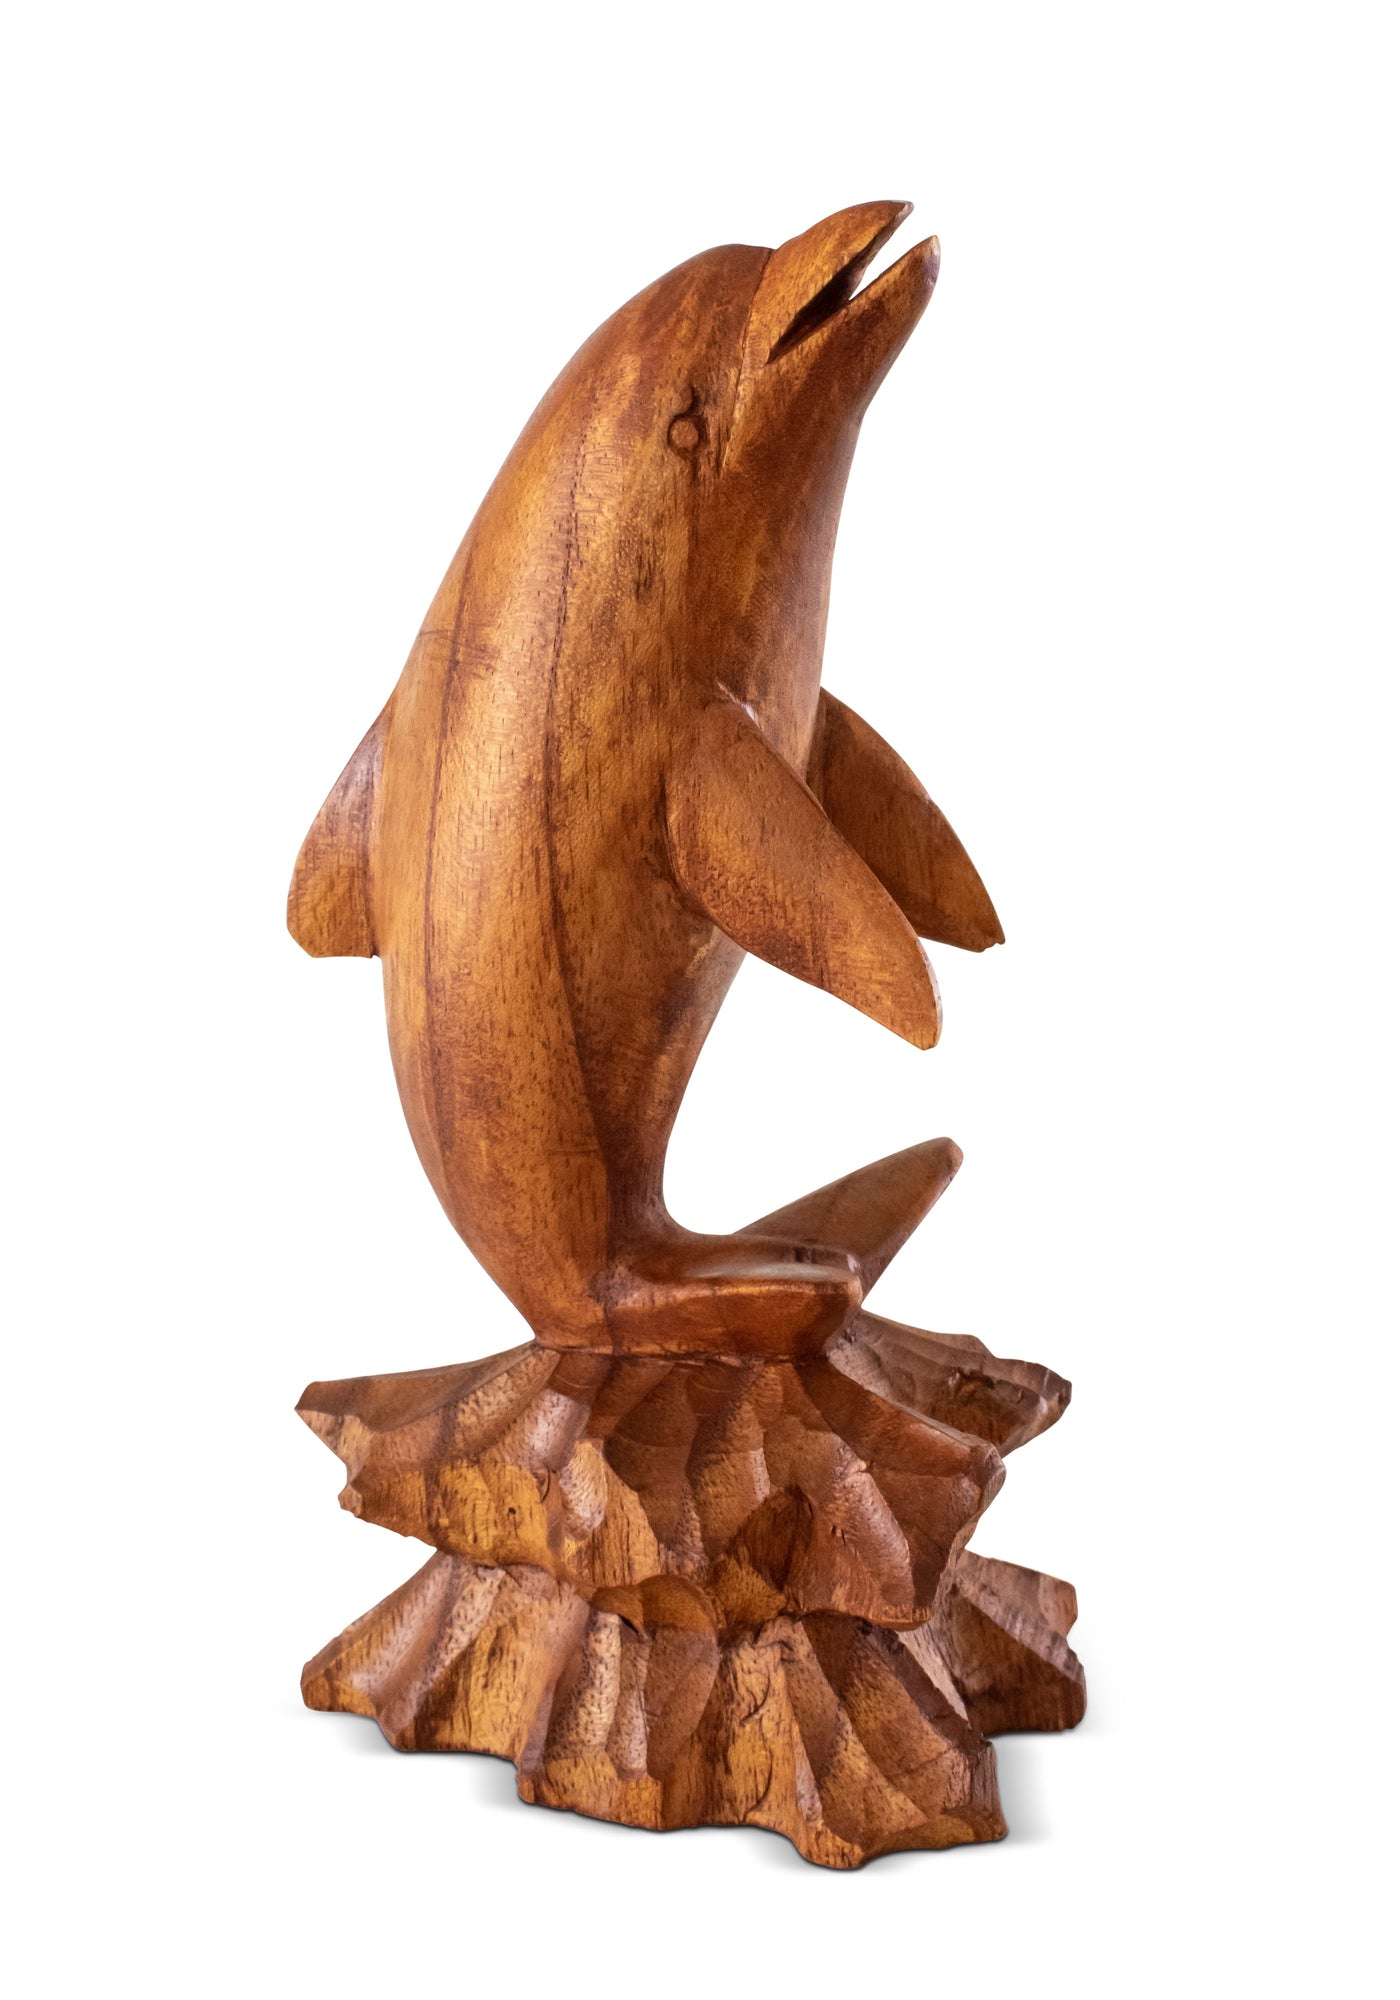 Wooden Hand Carved Dolphin on Coral Statue Sculpture Wood Decorative Decor Fish Figurine Handcrafted Handmade Seaside Tropical Nautical Ocean Coastal